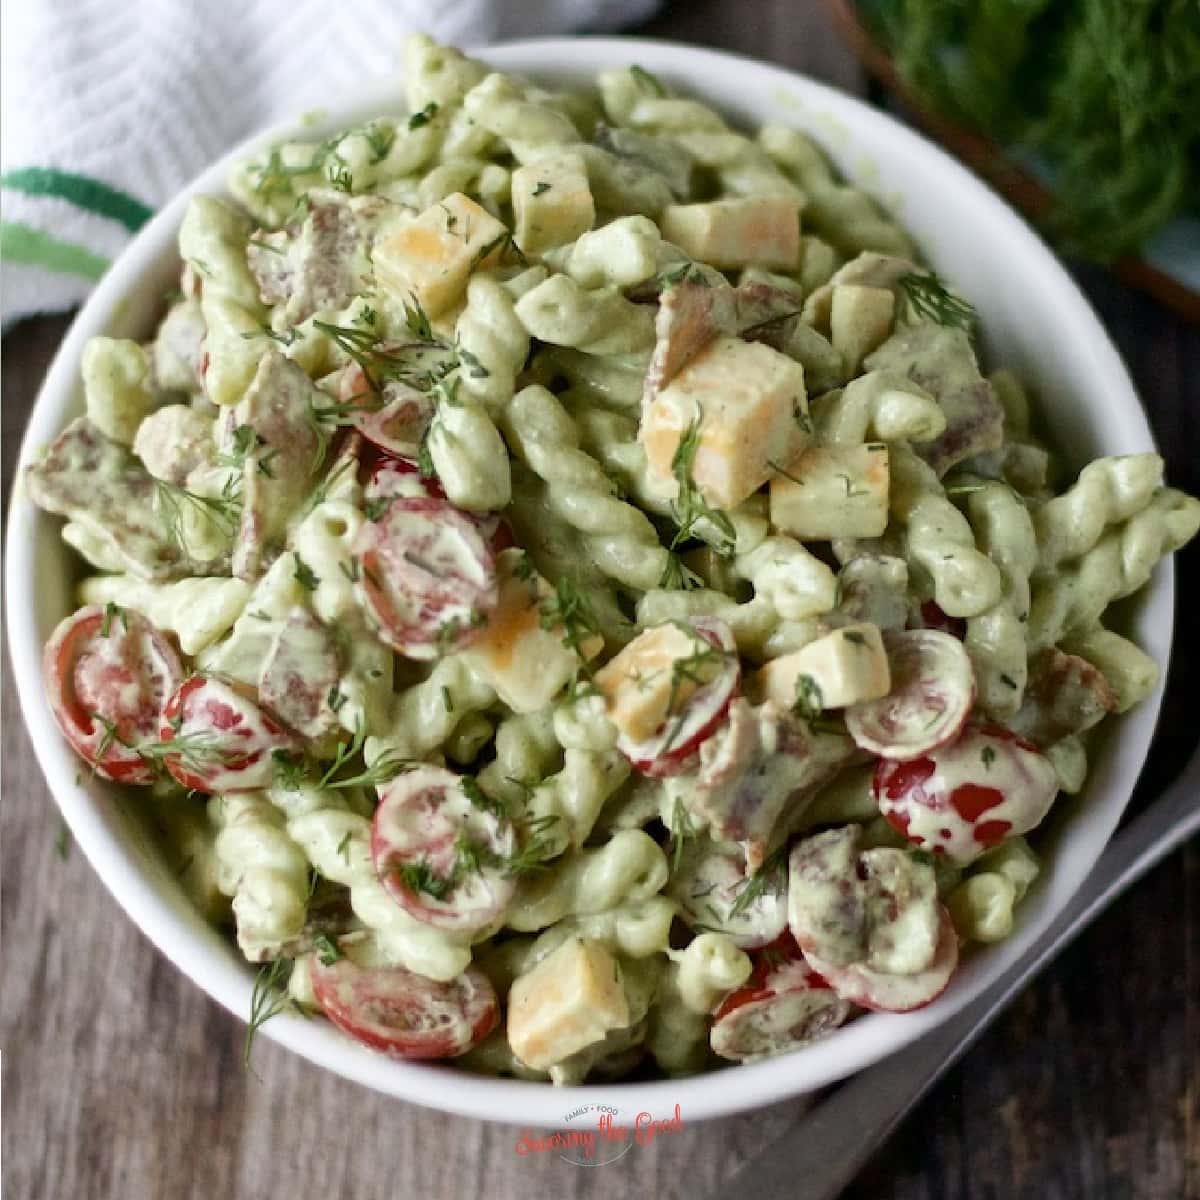 Dill pickle pasta salad in a white bowl.